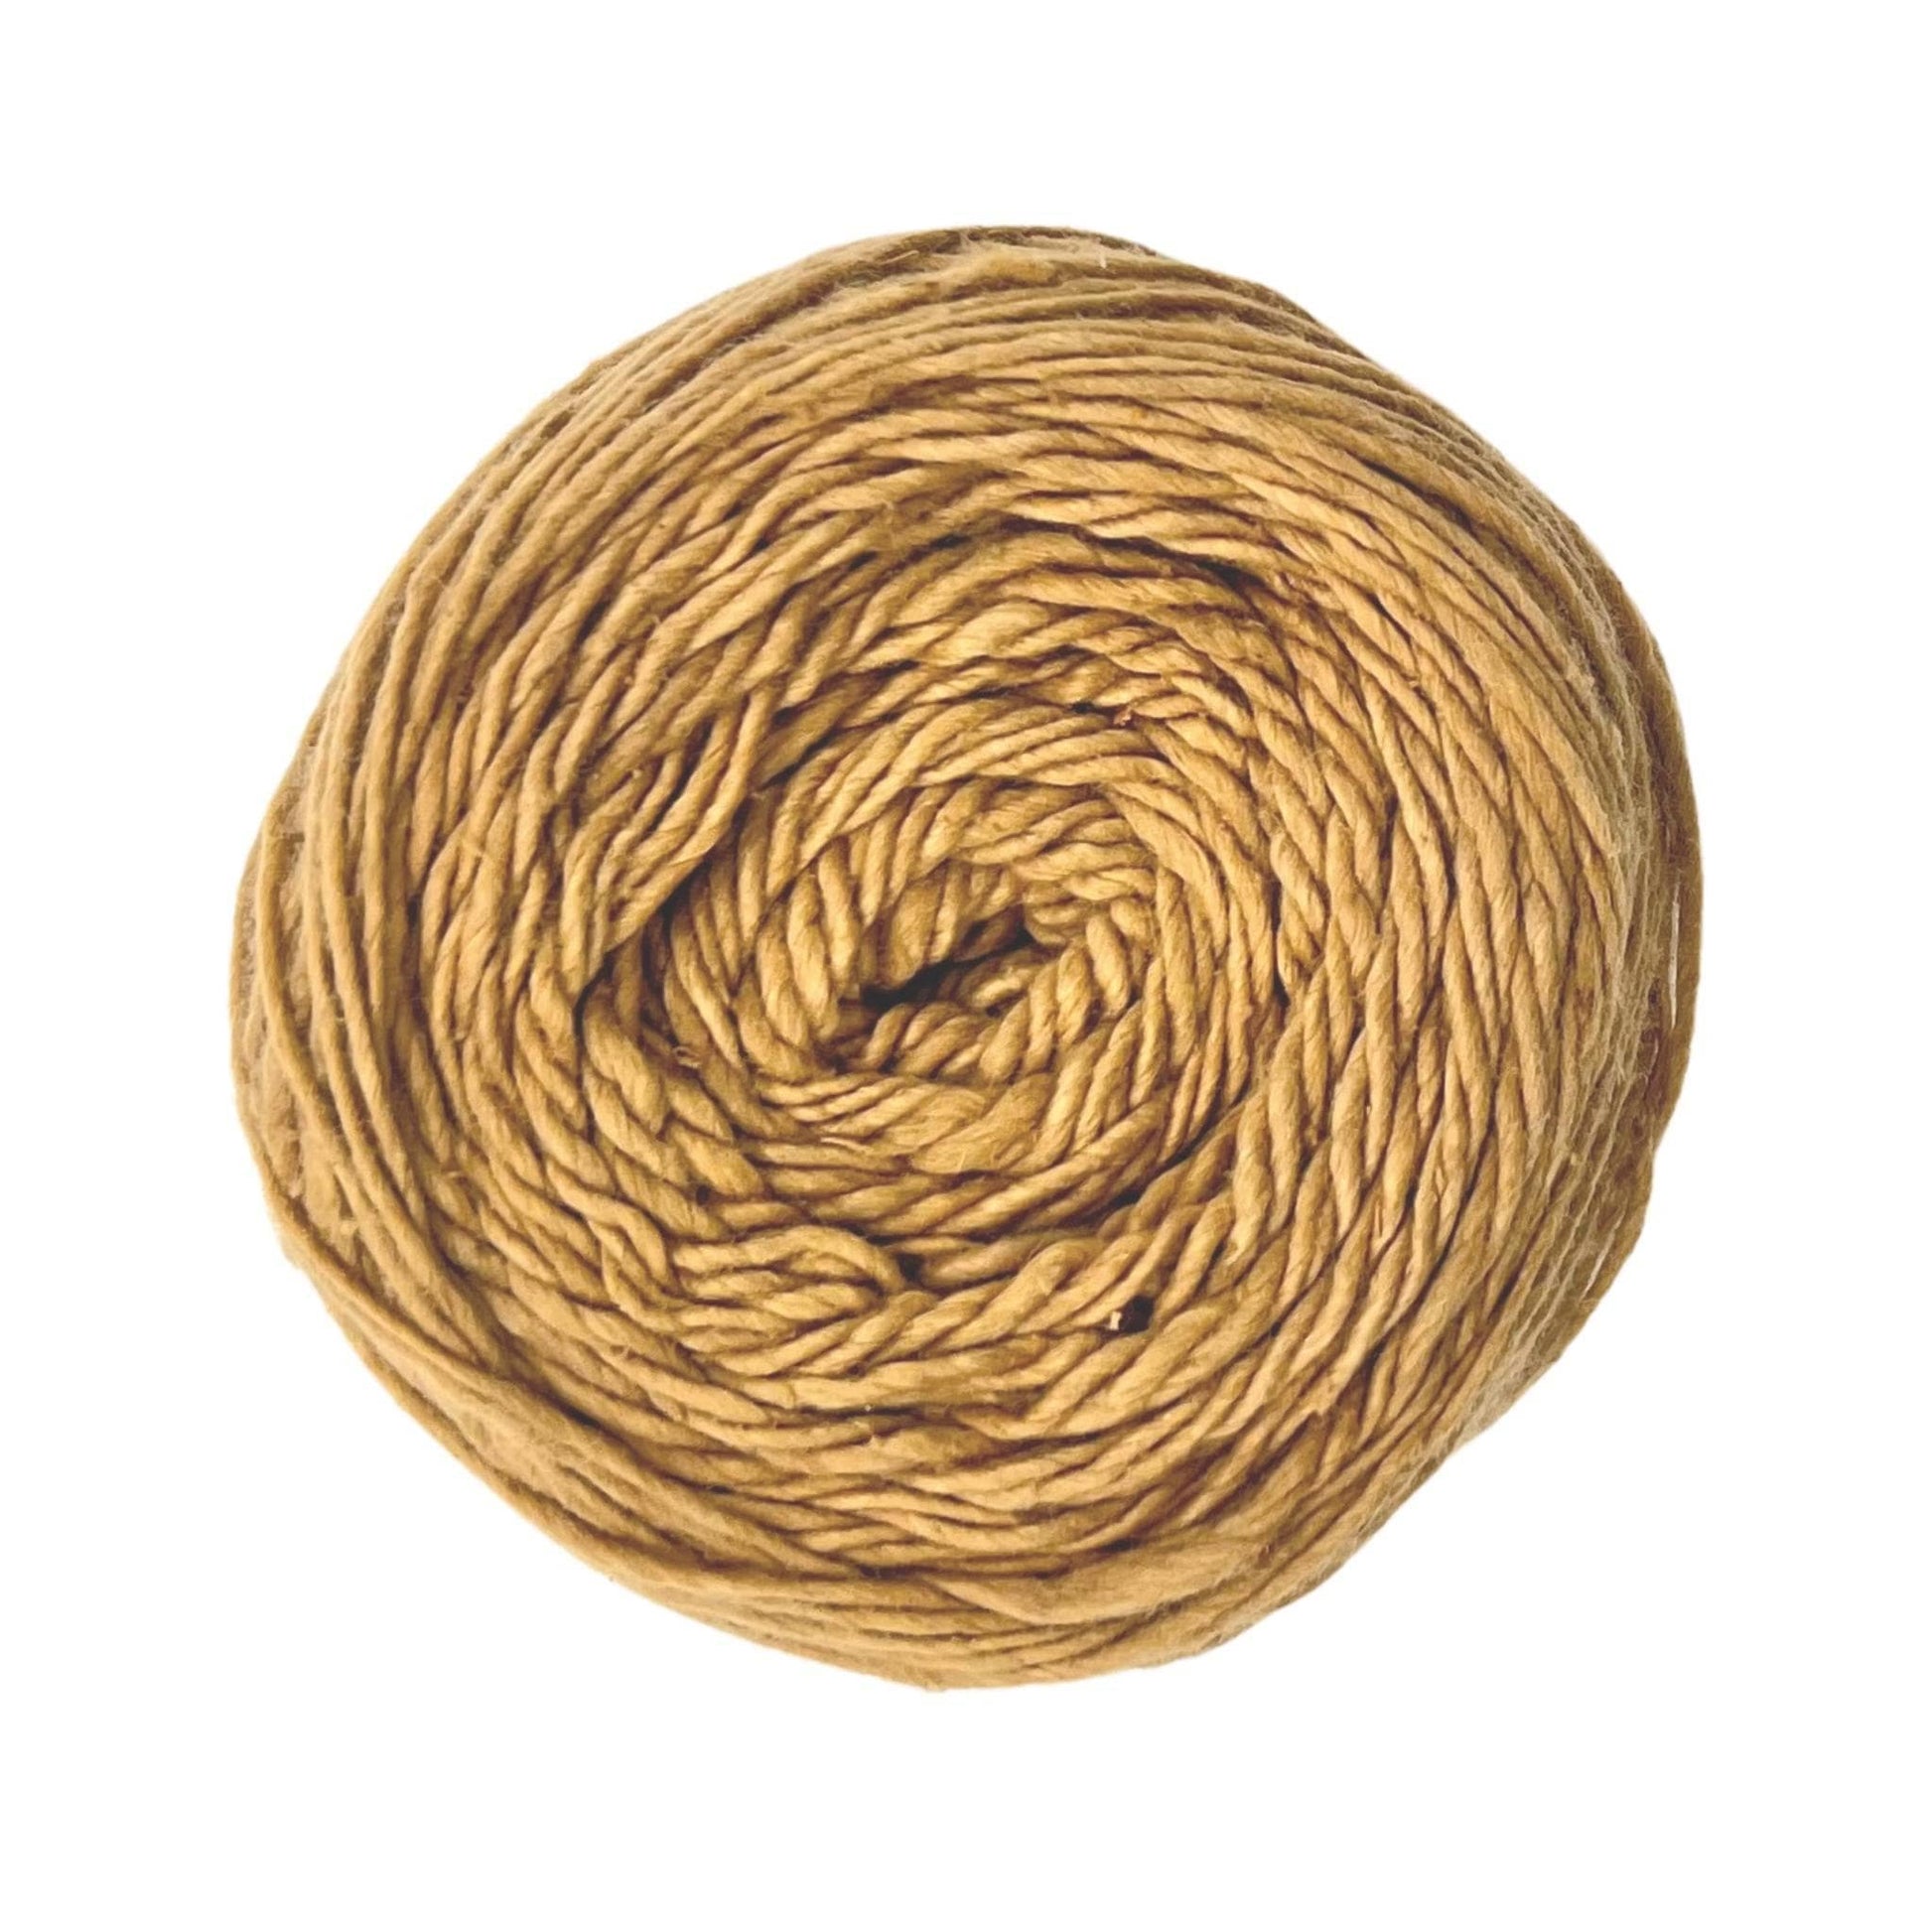 Skein of dk weight recycled silk yarn in front of a white background. Yarn is dyed with natural dyes and is a sandy beige color.